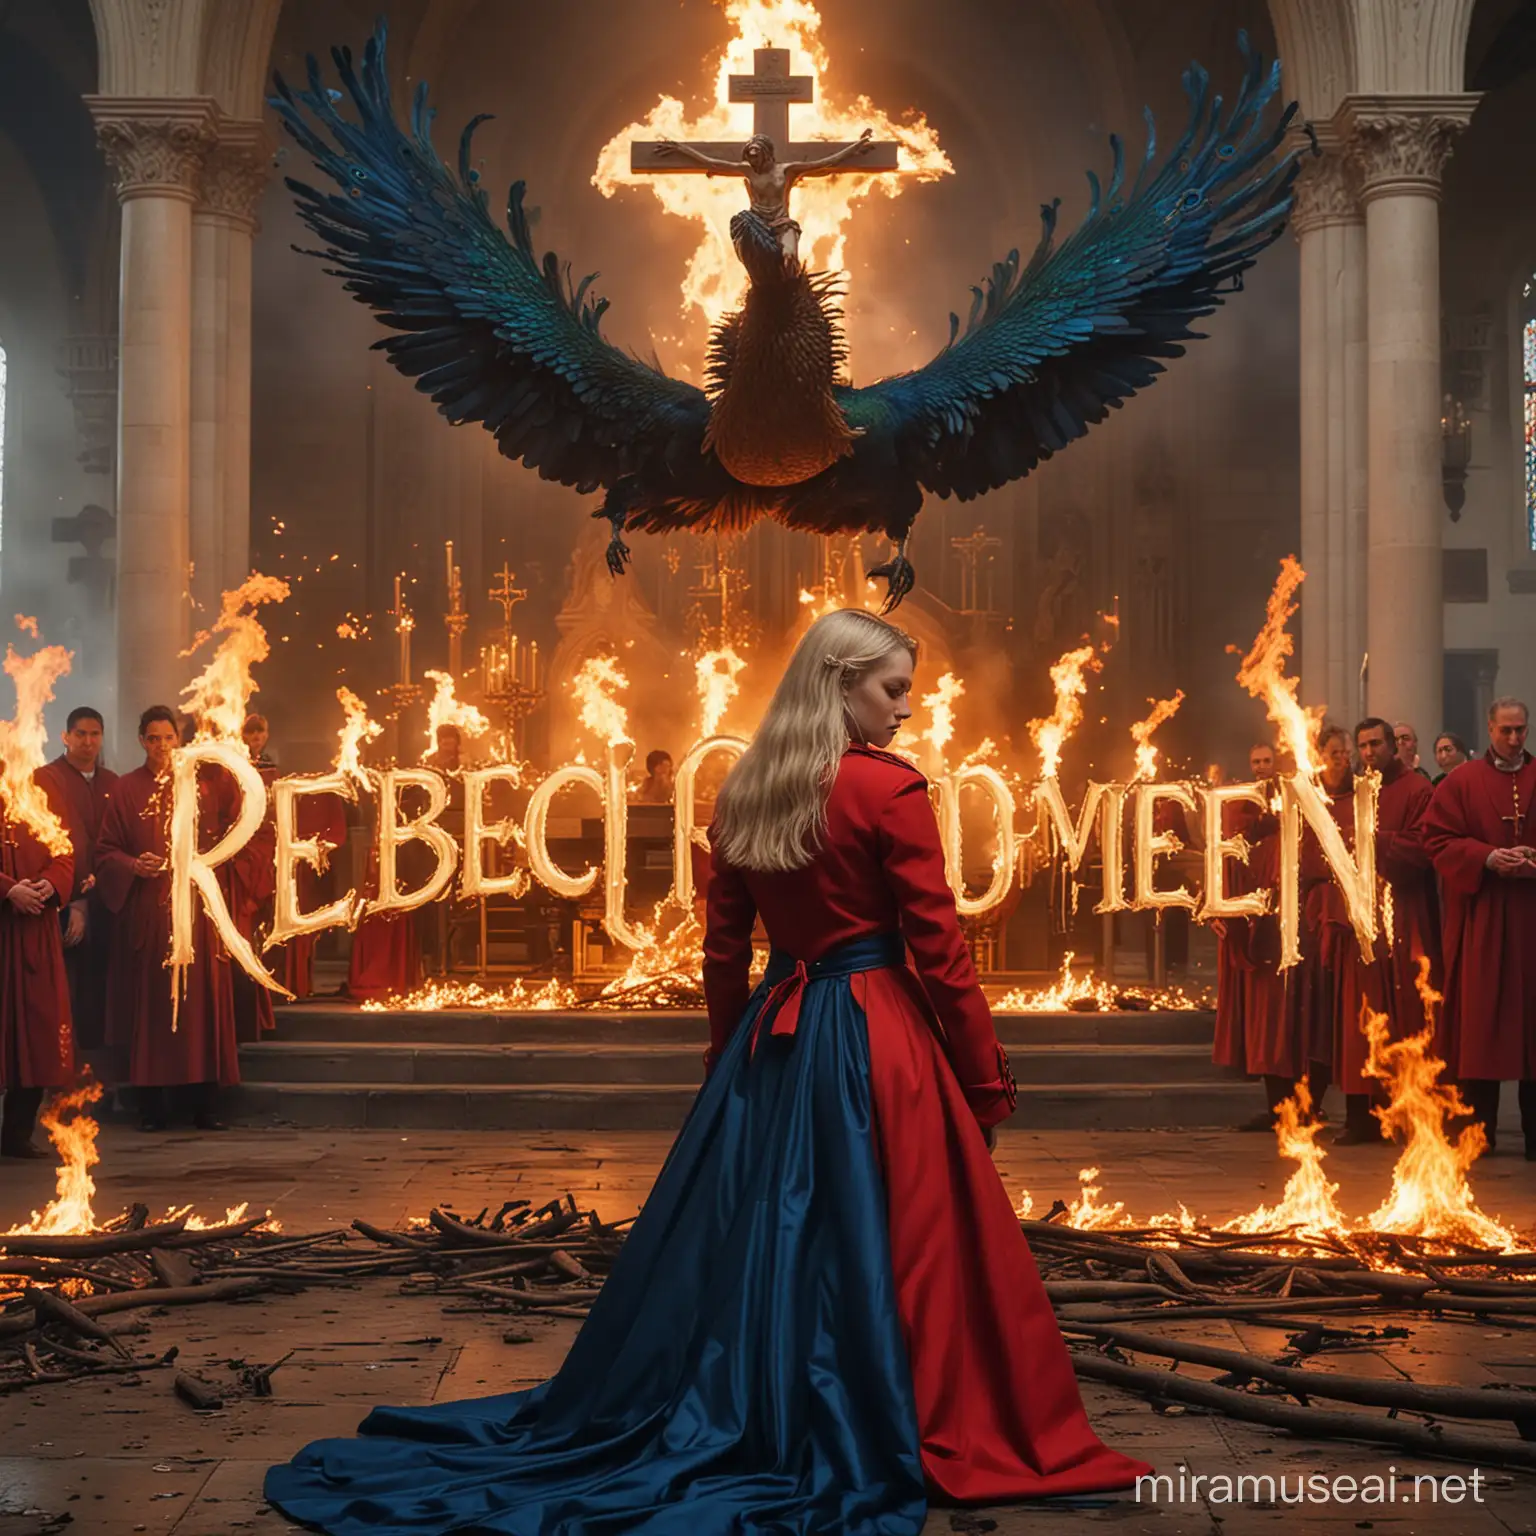 Teenage Empress Goddess in Blue Outfit Surrounded by Fire in Cathedral Setting